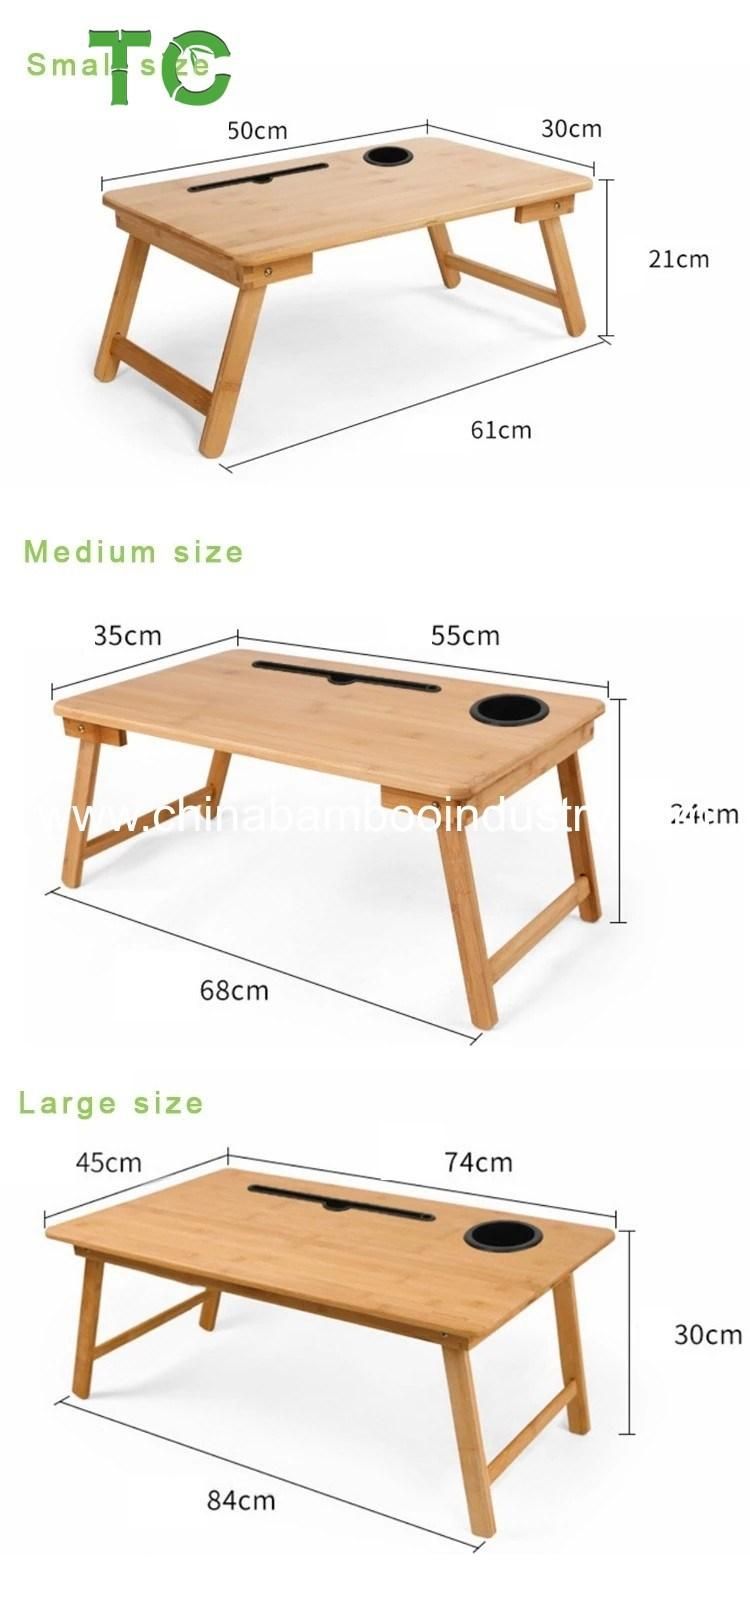 Whole Bamboo Folding Laptop Desk for Bed Laptop Table Bamboo Bed Tray with Drawer